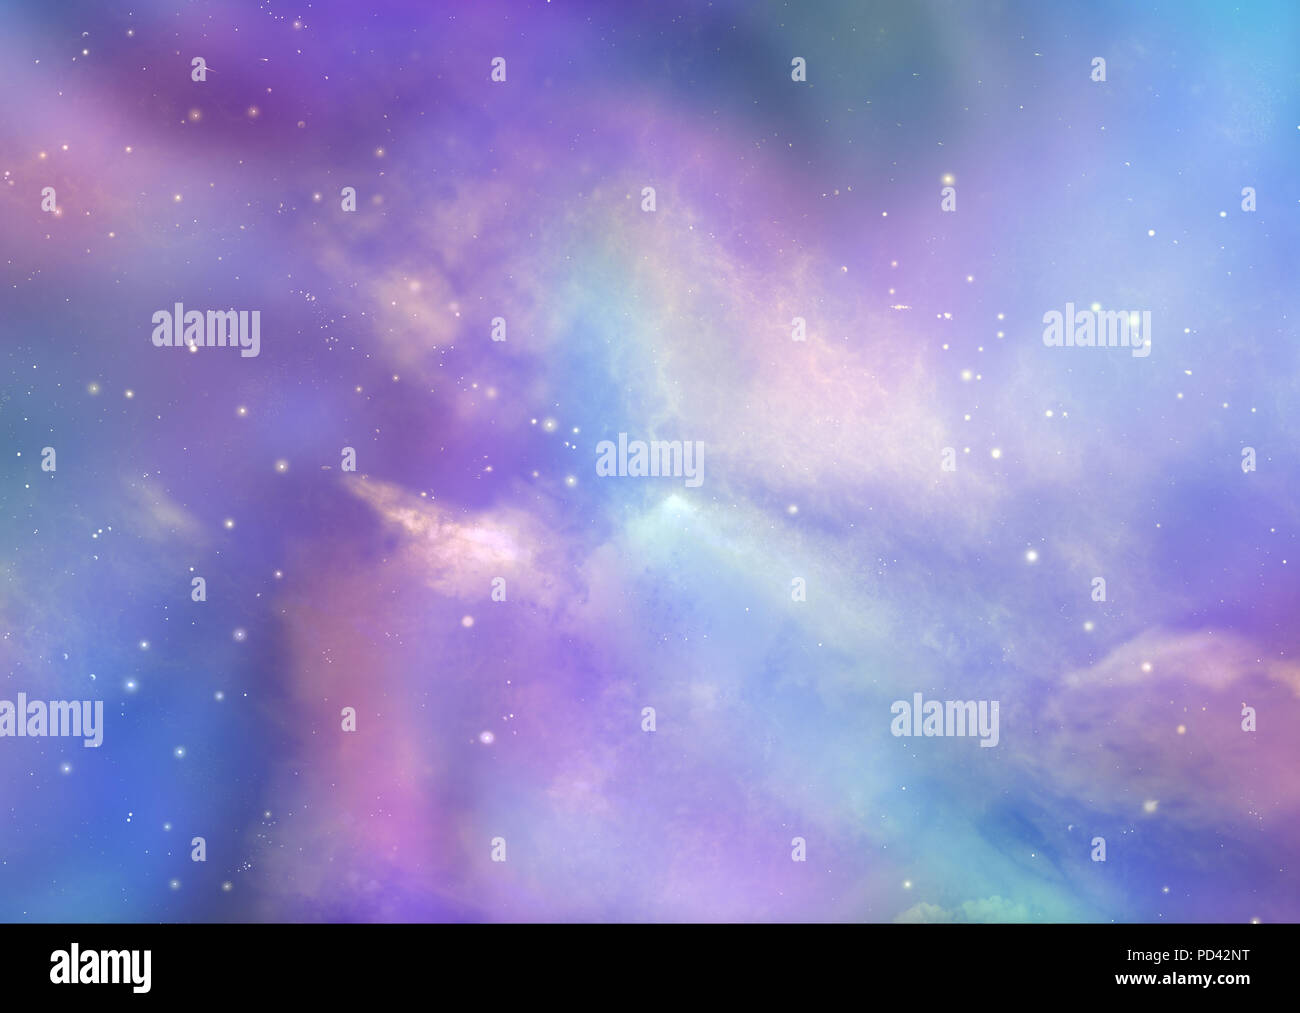 The Beautiful Heavens Above Us - Pink and blue deep space background with many stars, planets and cloud formations Stock Photo